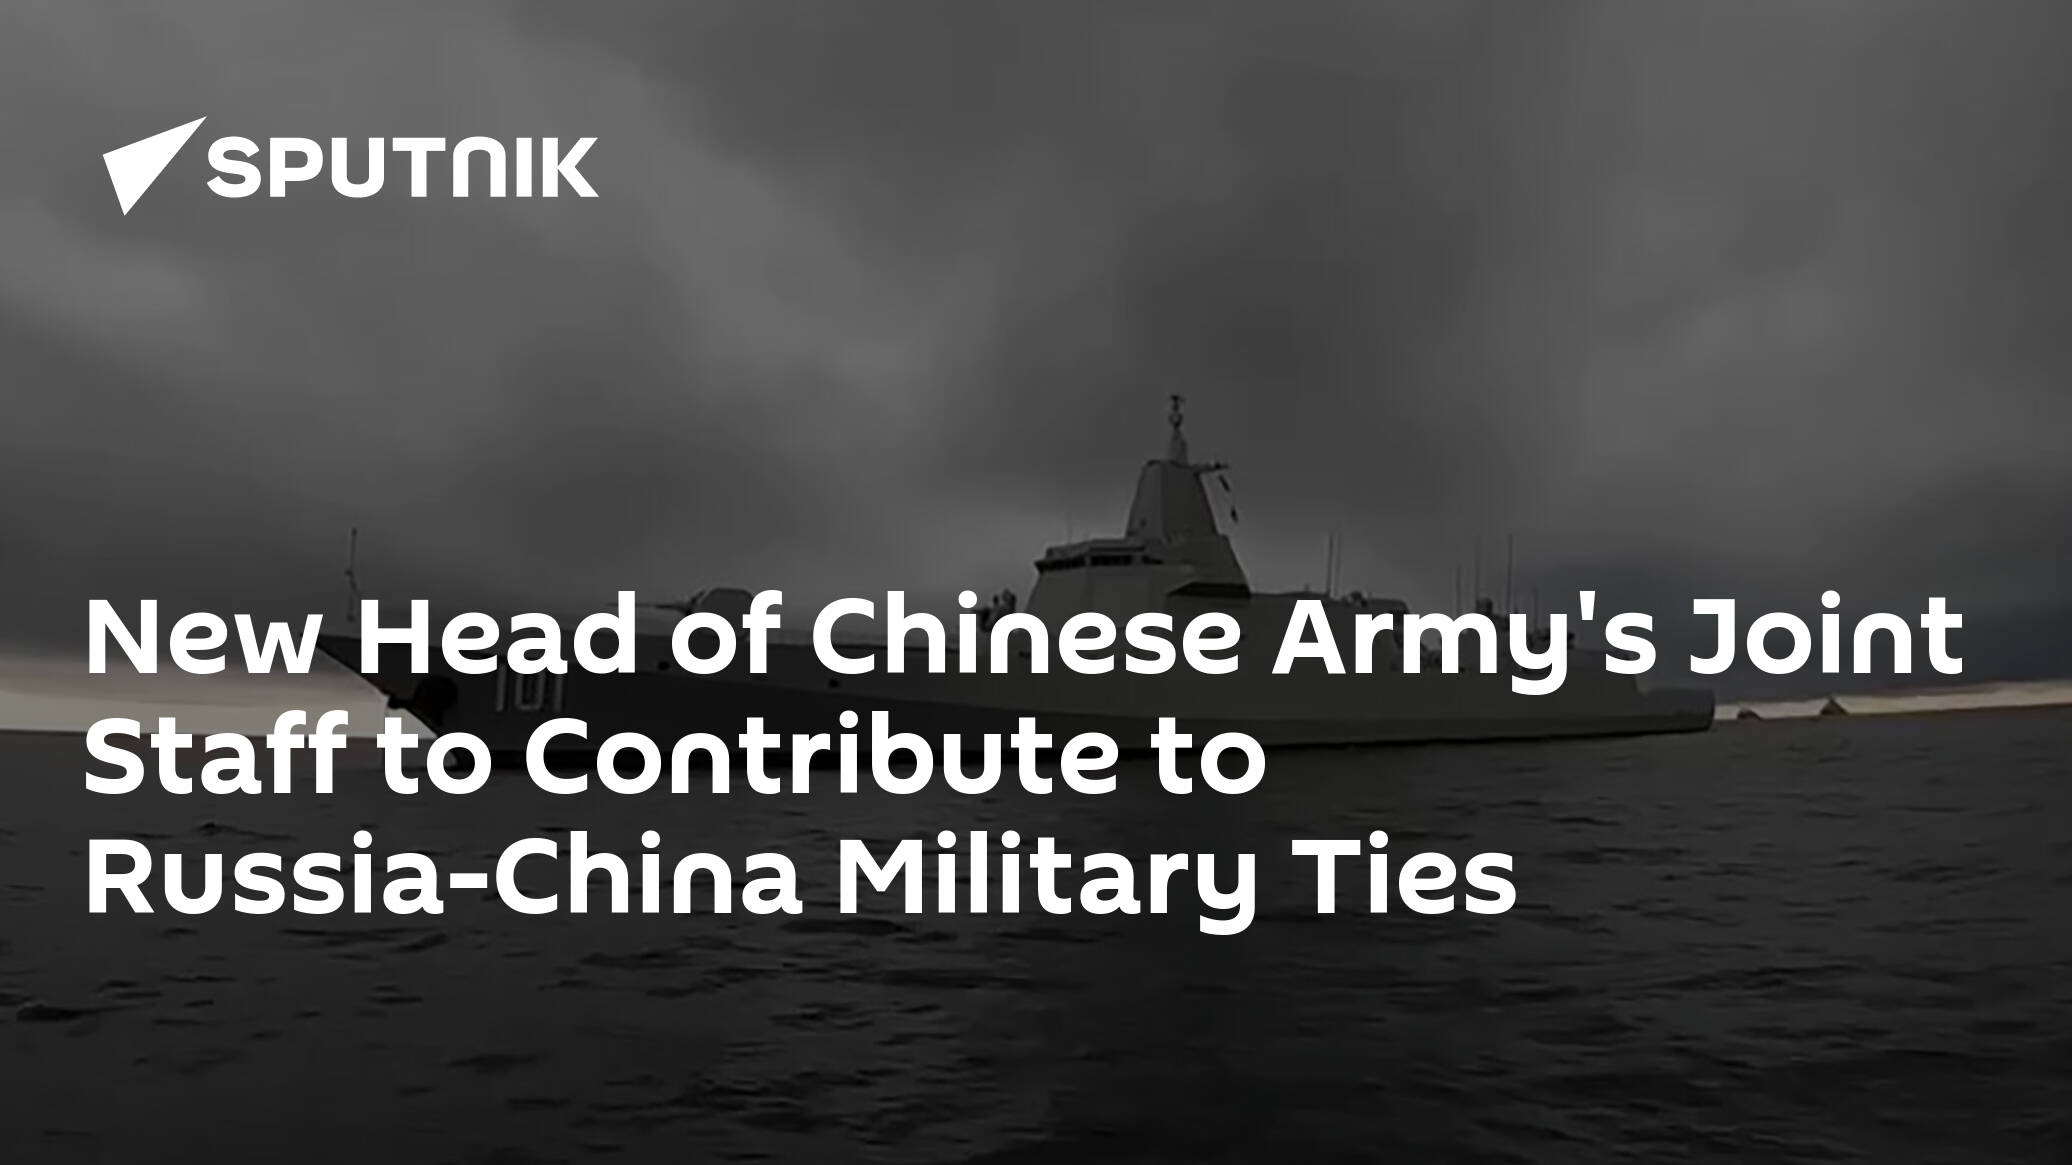 New Head of Chinese Army's Joint Staff to Contribute to Russia-China Military Ties